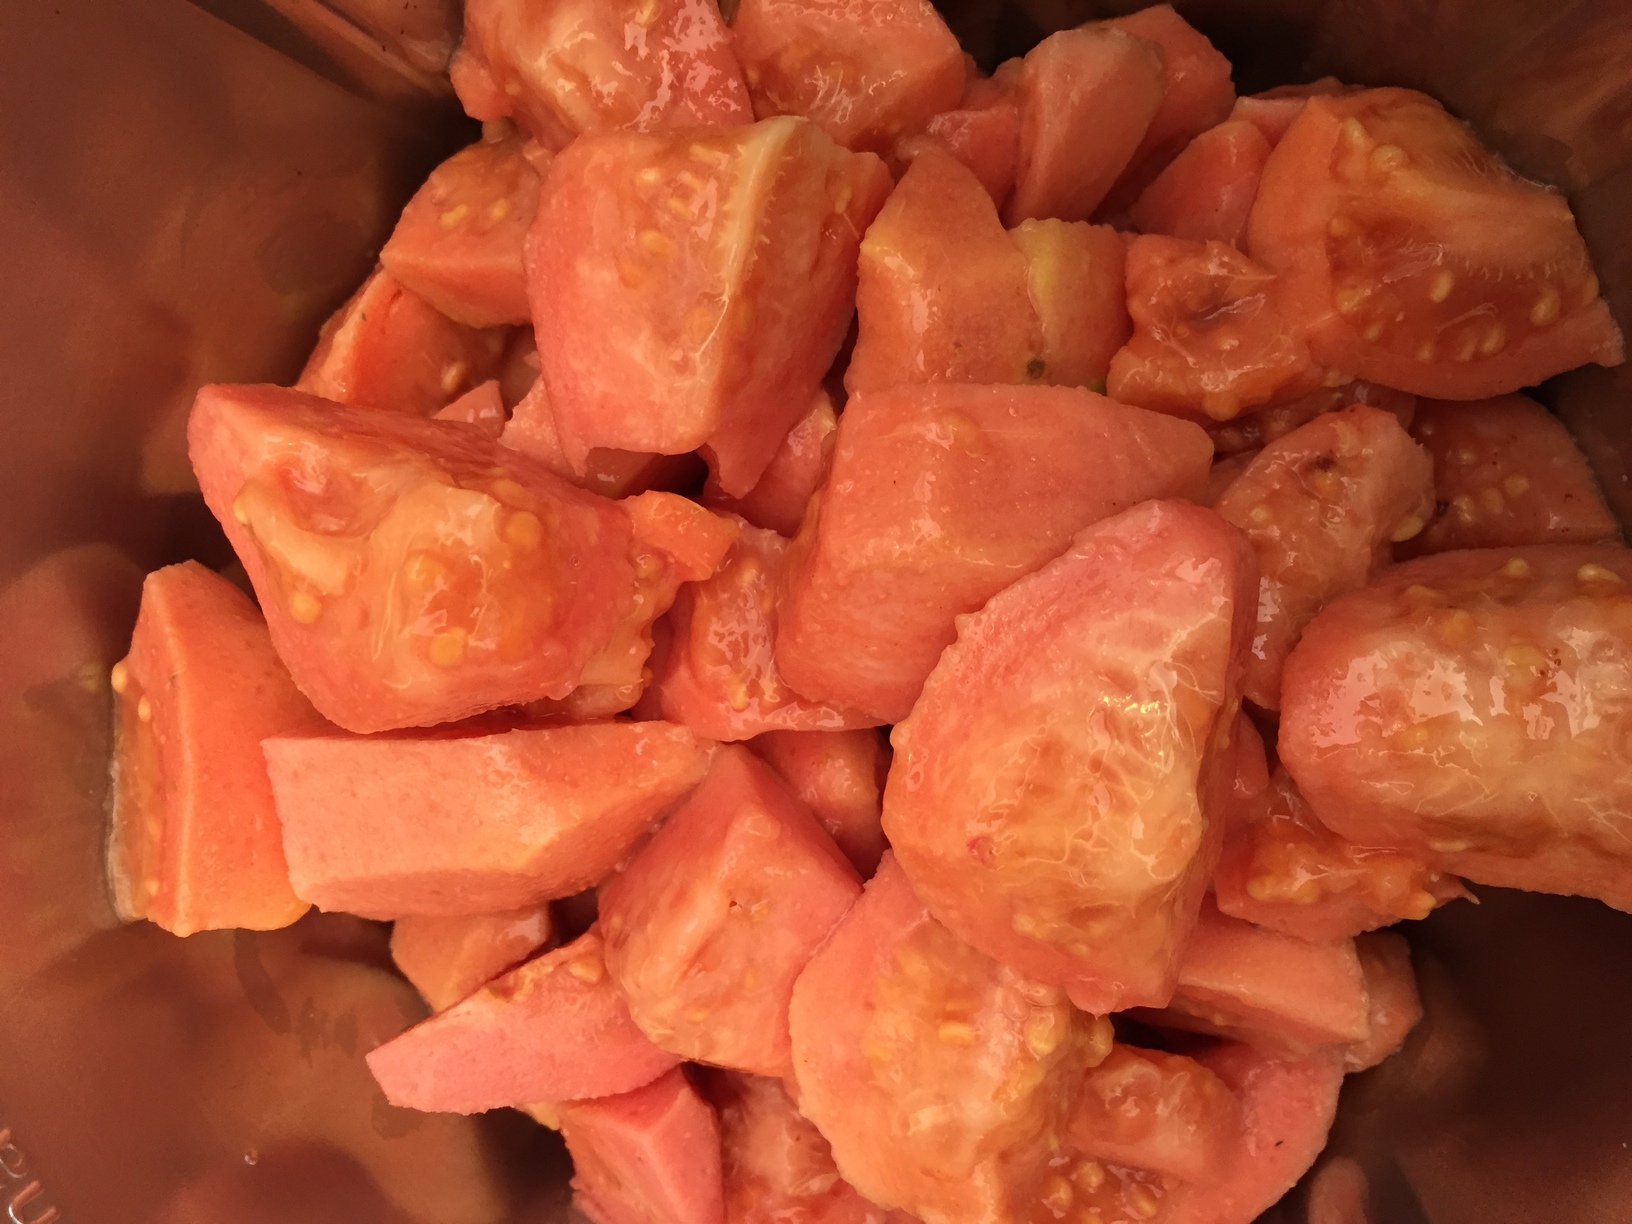 Guavas cut up and in the Thermomix, ready to cook and puree.